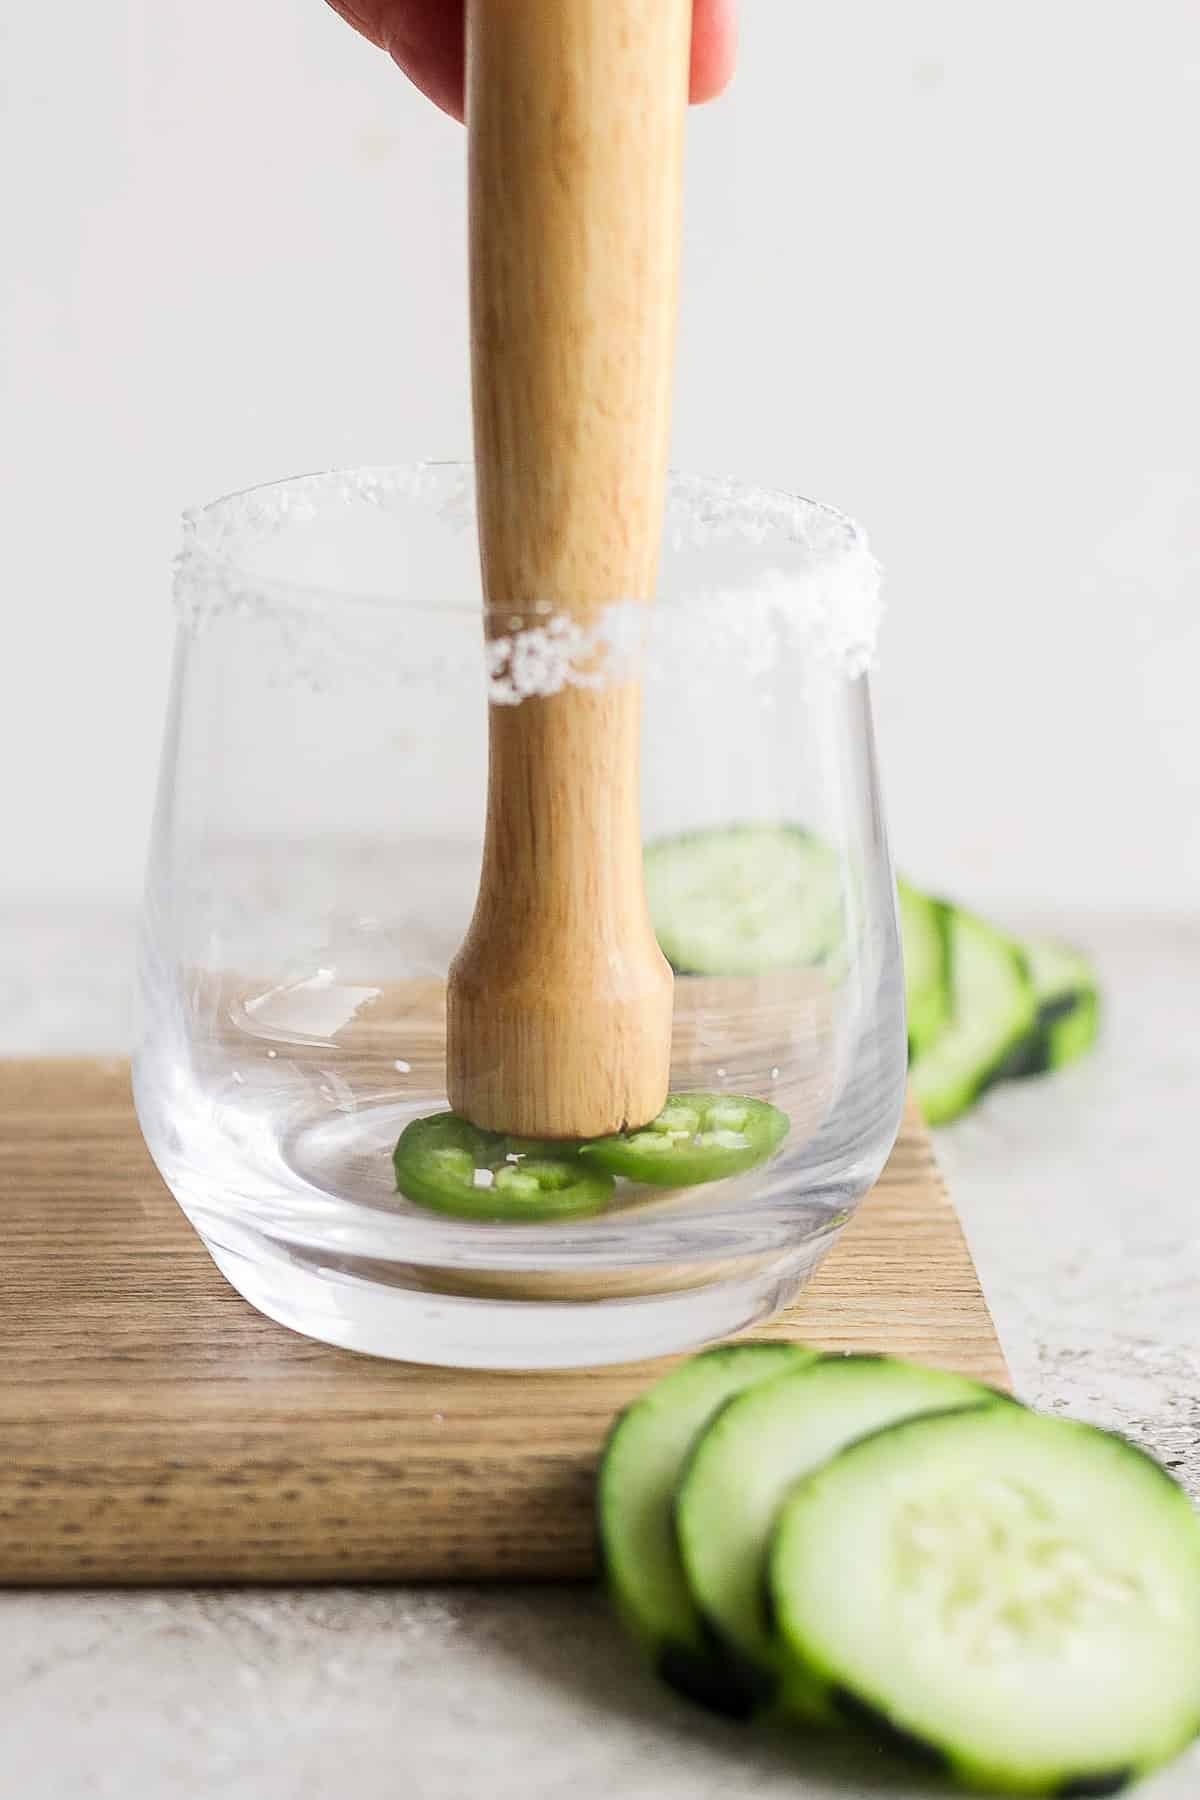 Jalapeño slices being muddled in a glass.